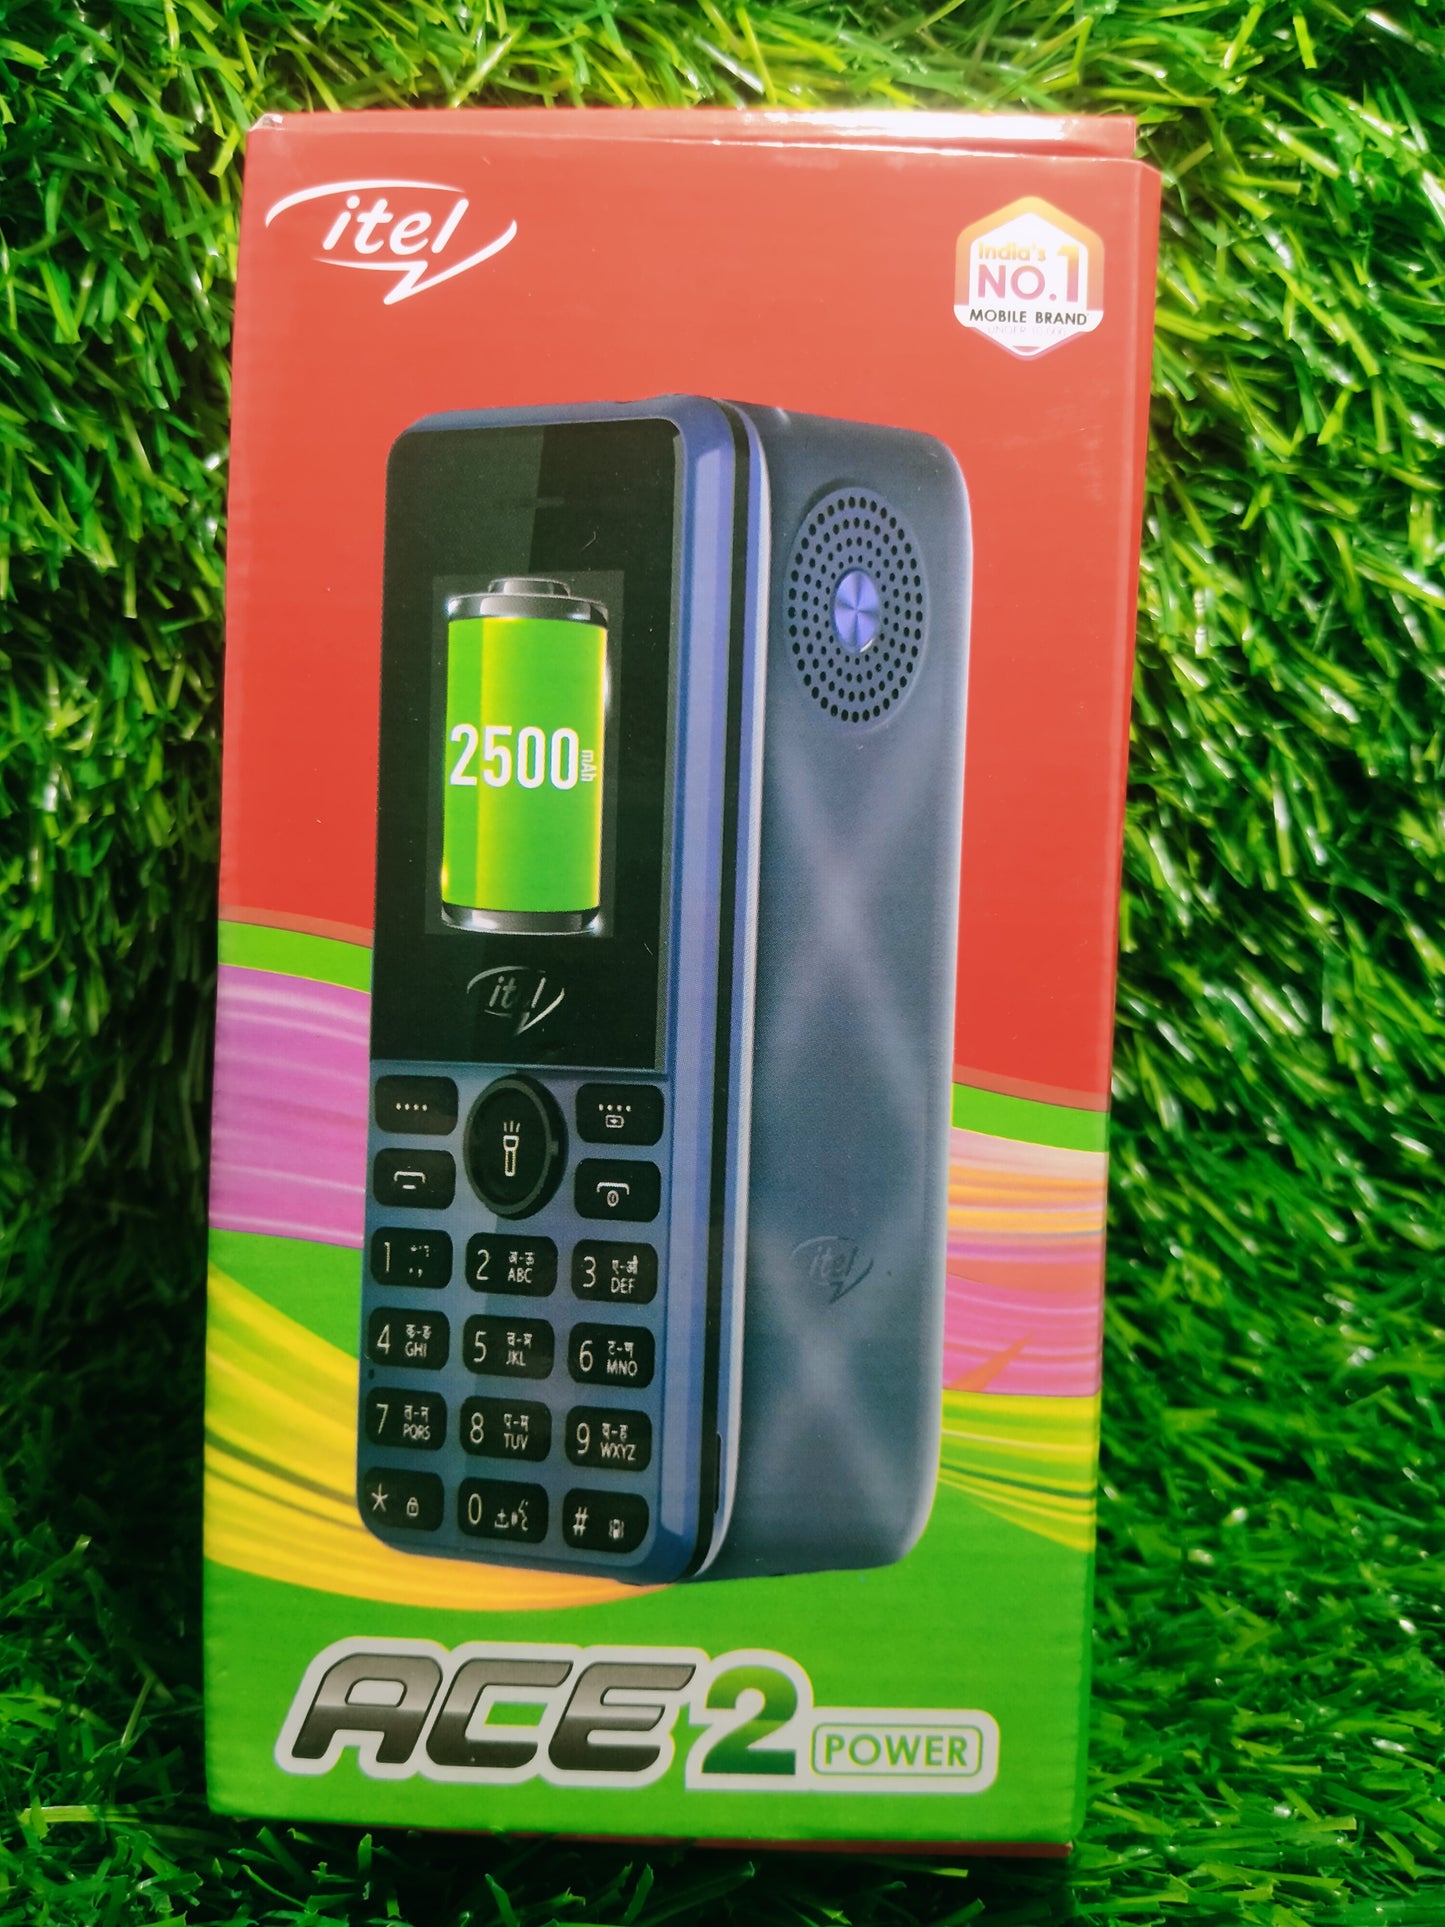 itel ACE2POWER mobile phone